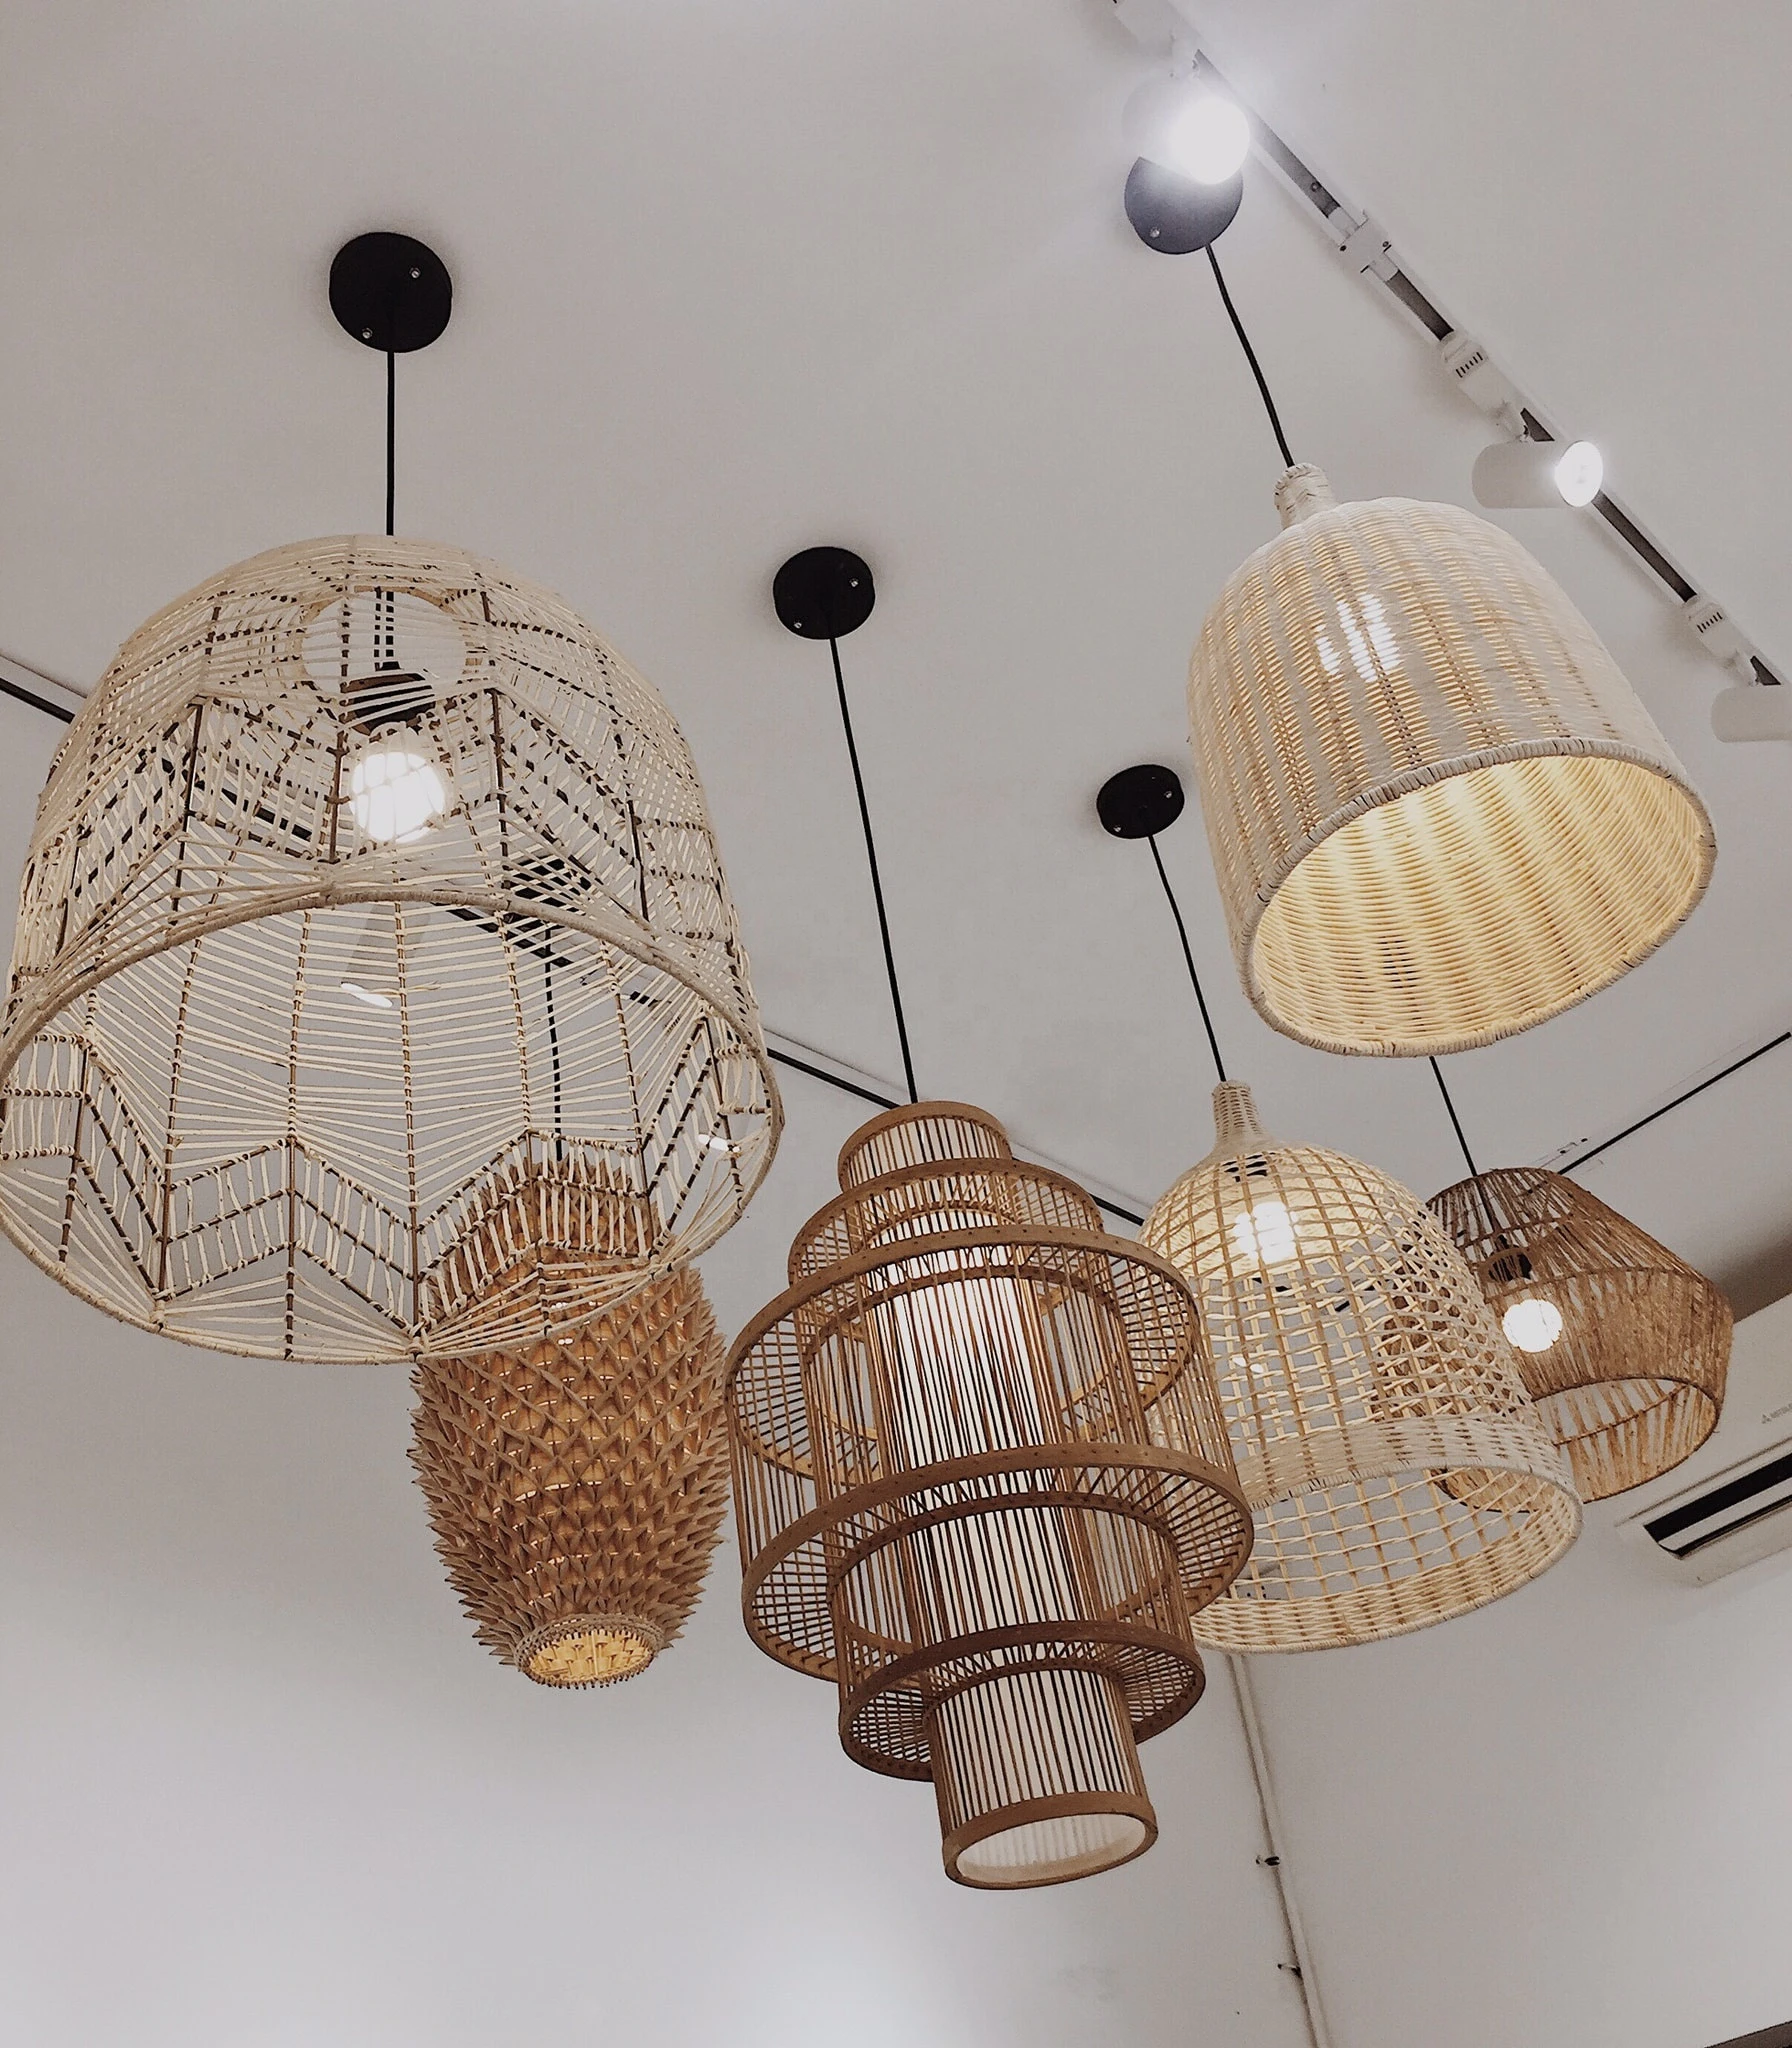 Craft Bamboo Wicker Rattan lampshade Hanging Ceiling Pendant Light Fixture from Vietnam (Model number: SS-613)